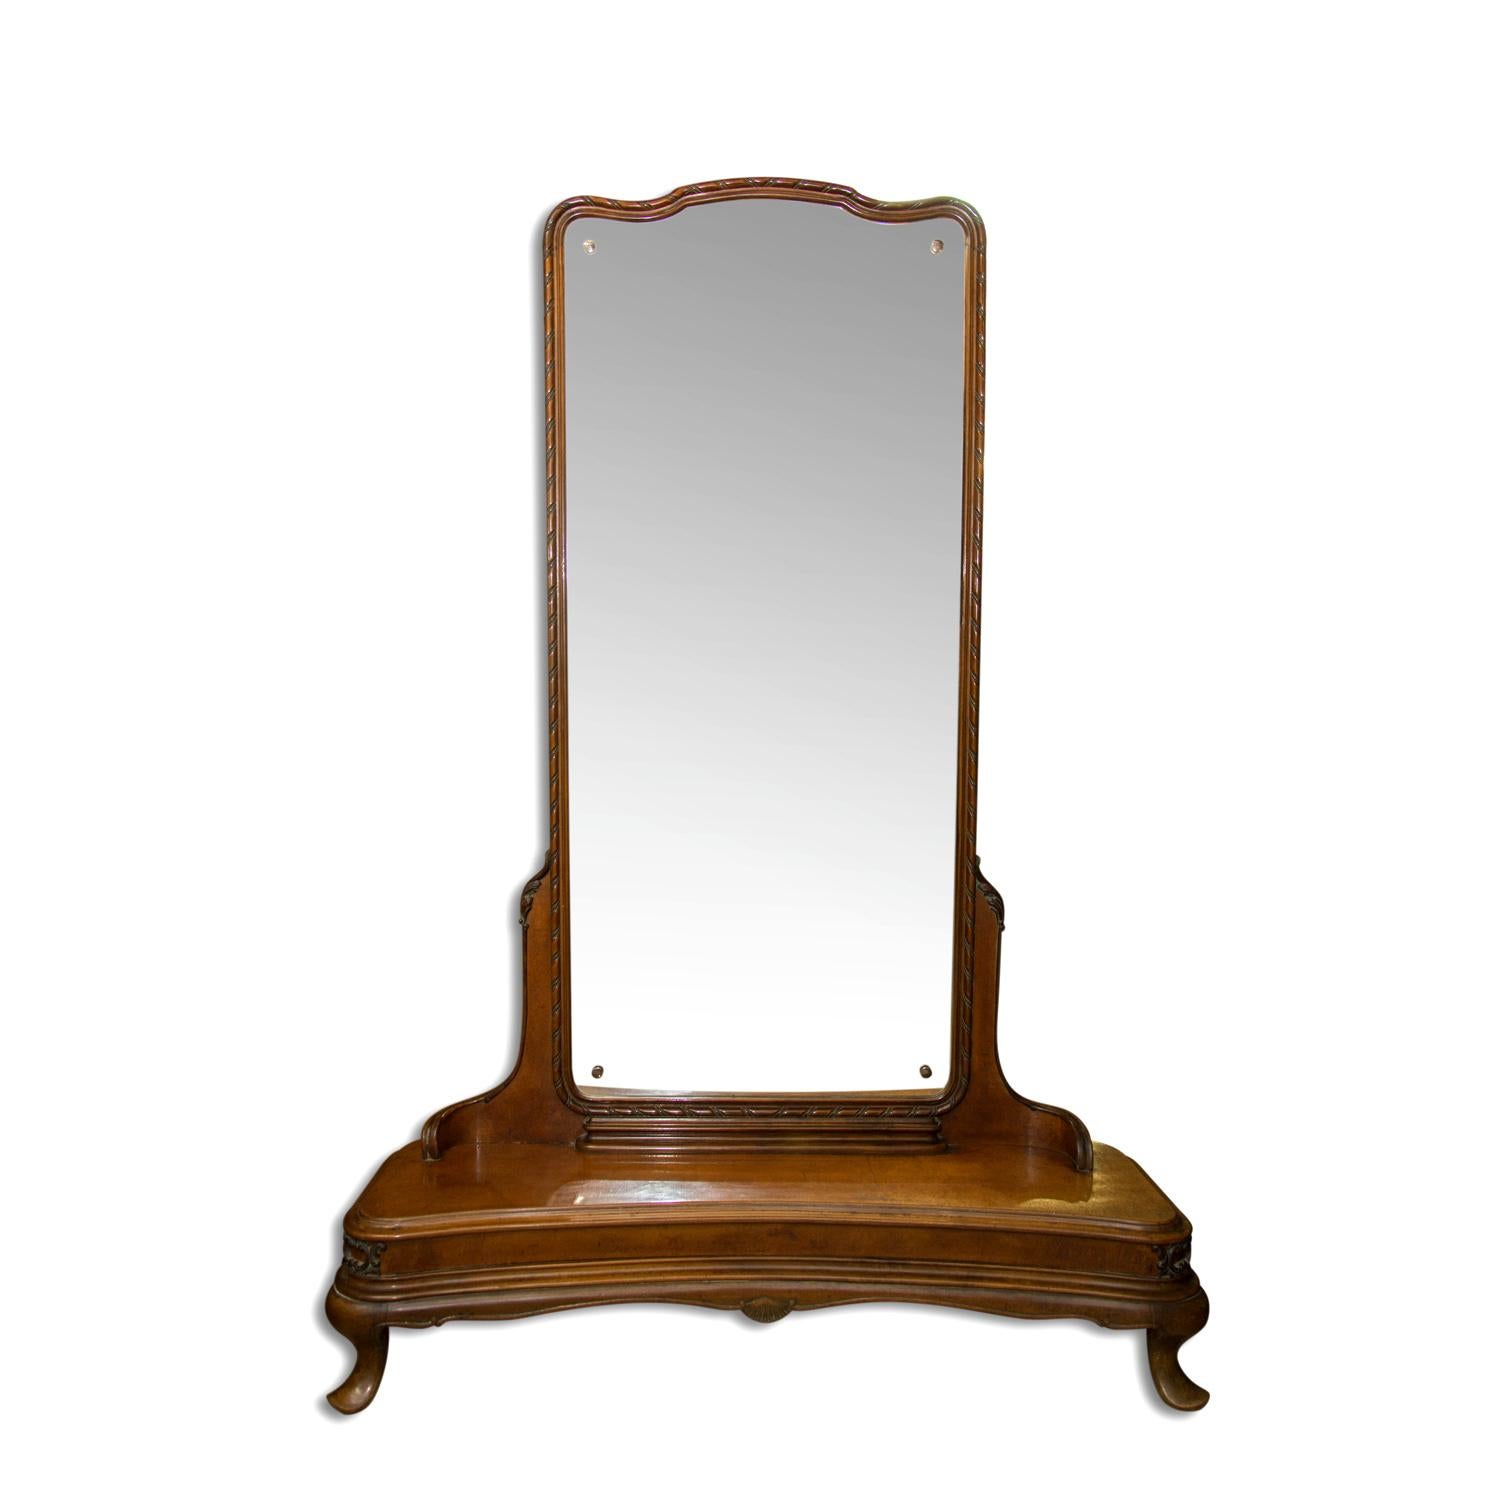 This Art Deco huge mirror or dressing table was made in Bohemia in the 1920s. It´s made of walnut It´s on a wide base with rectangular mirror. Very interesting design.
In very good vintage condition.